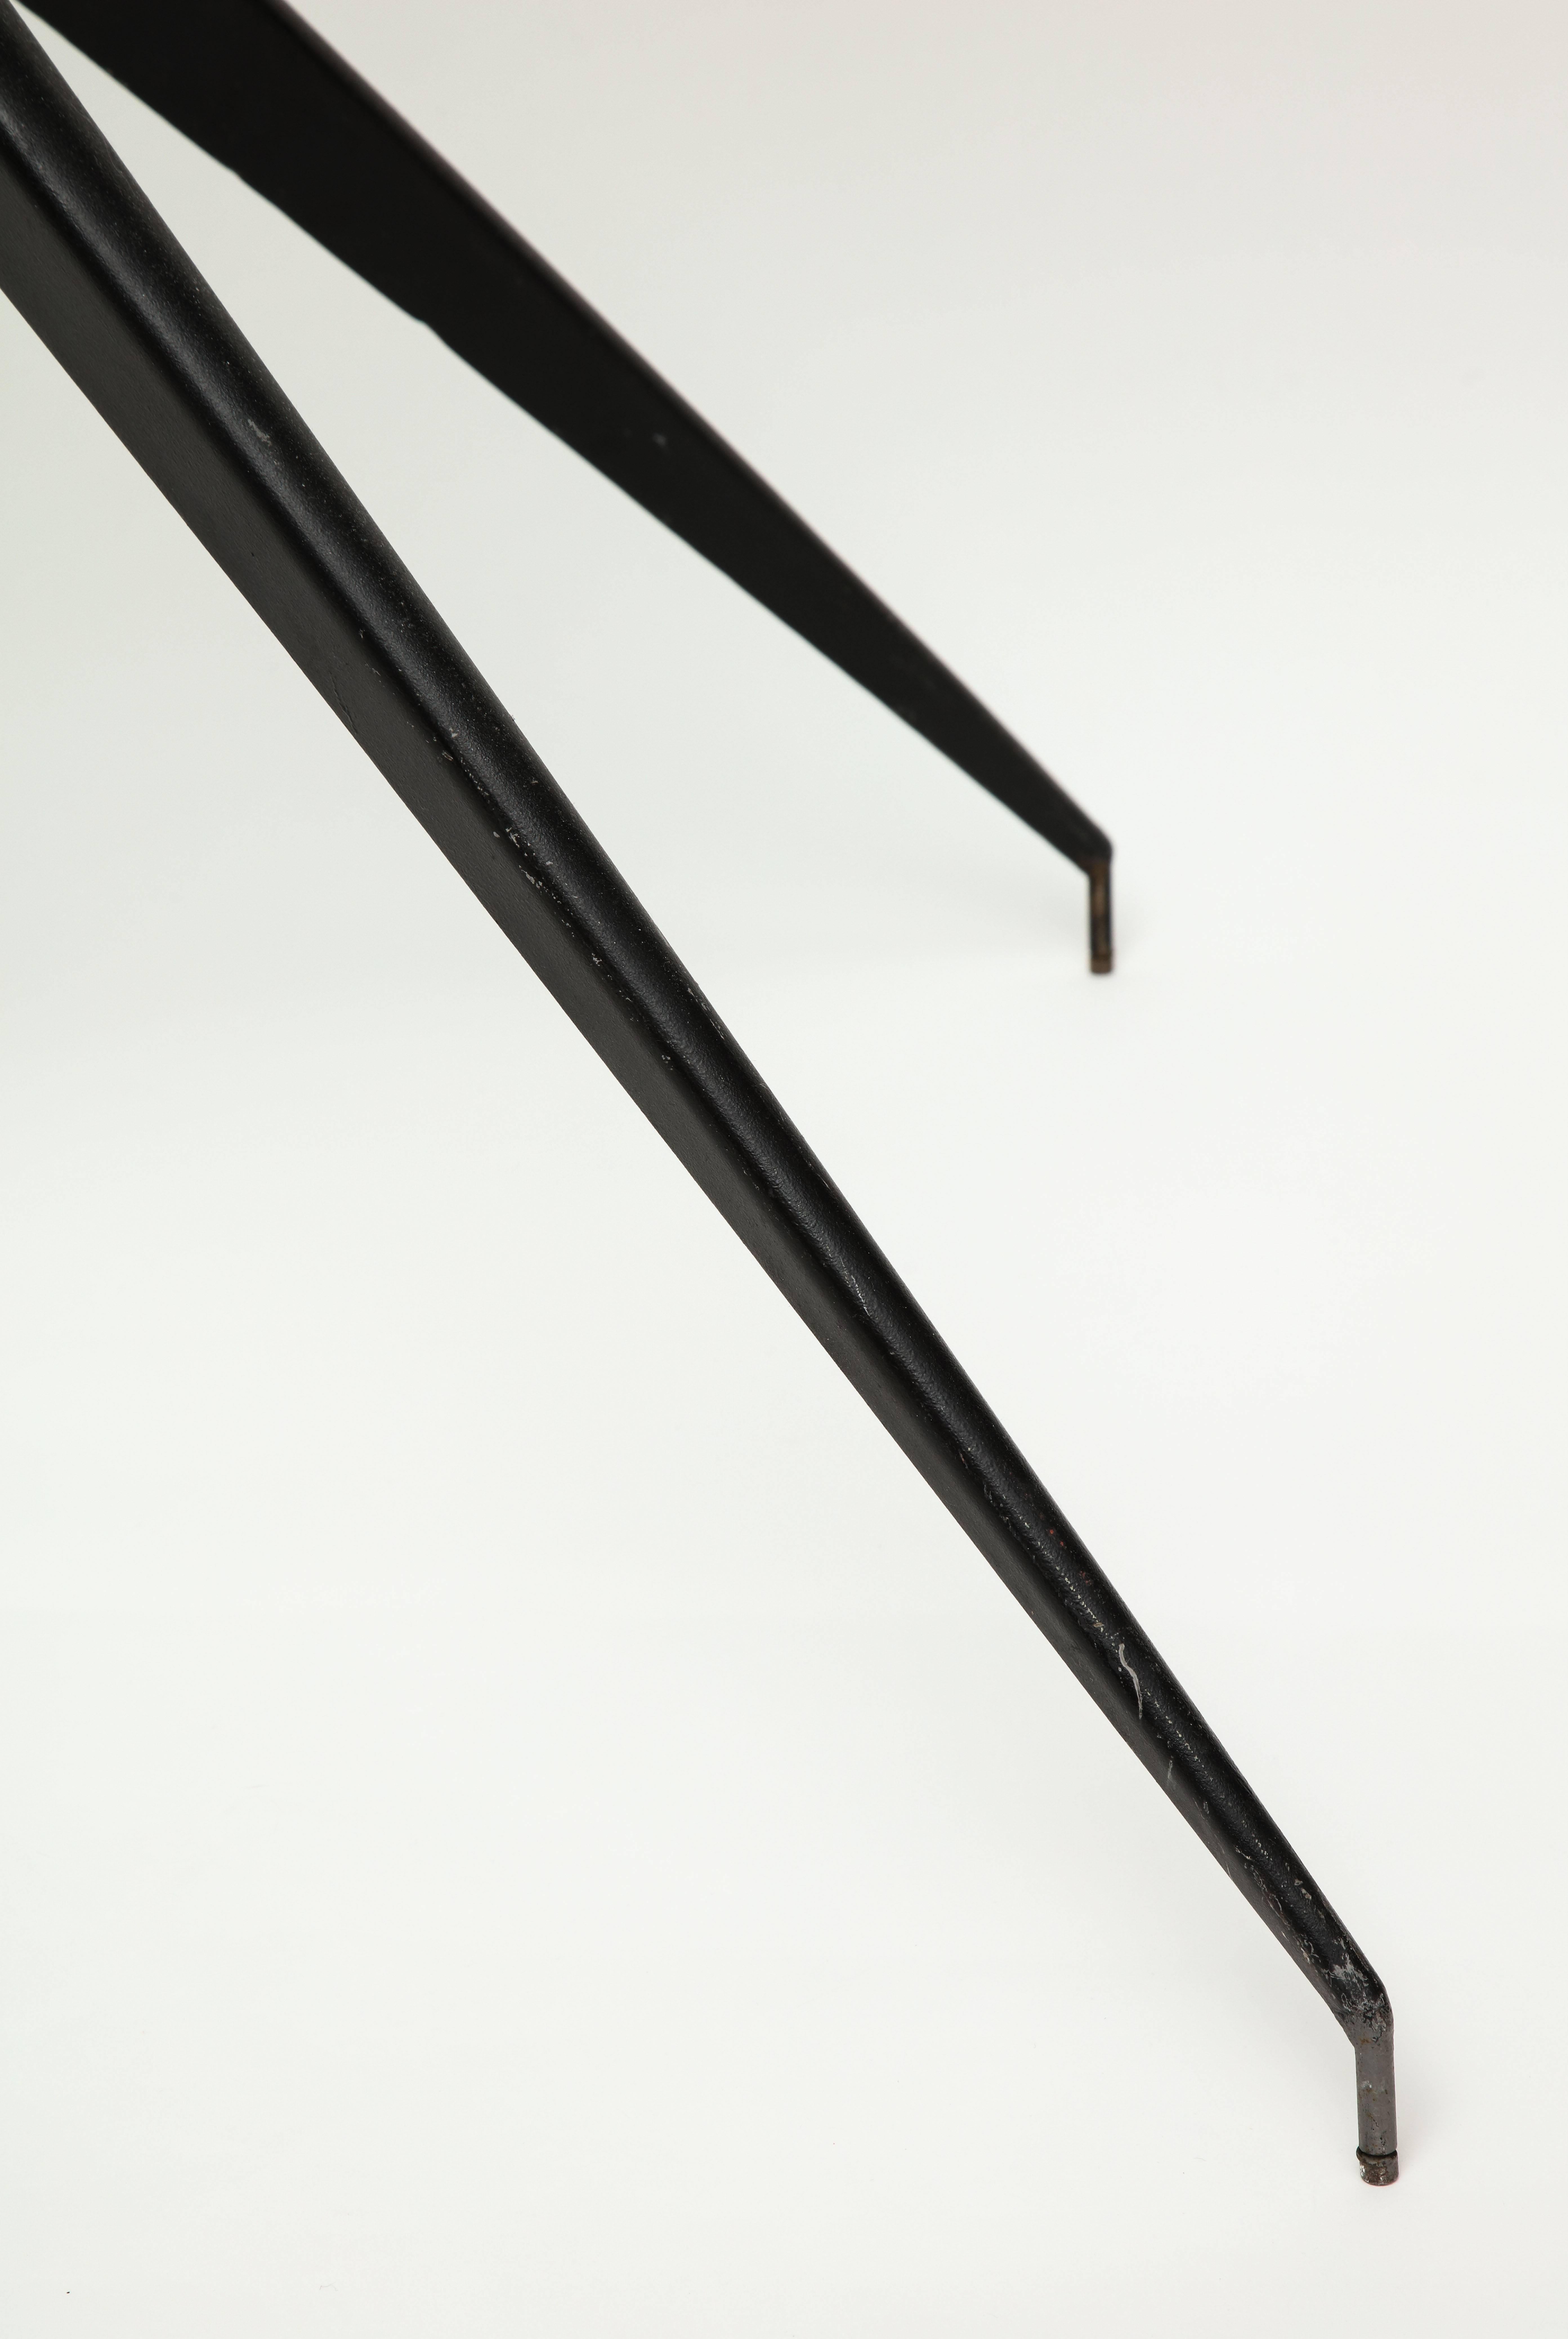 Mid-Century Black Iron Console Table with Glass Top, Italy, 1950s-1960s In Good Condition For Sale In New York, NY